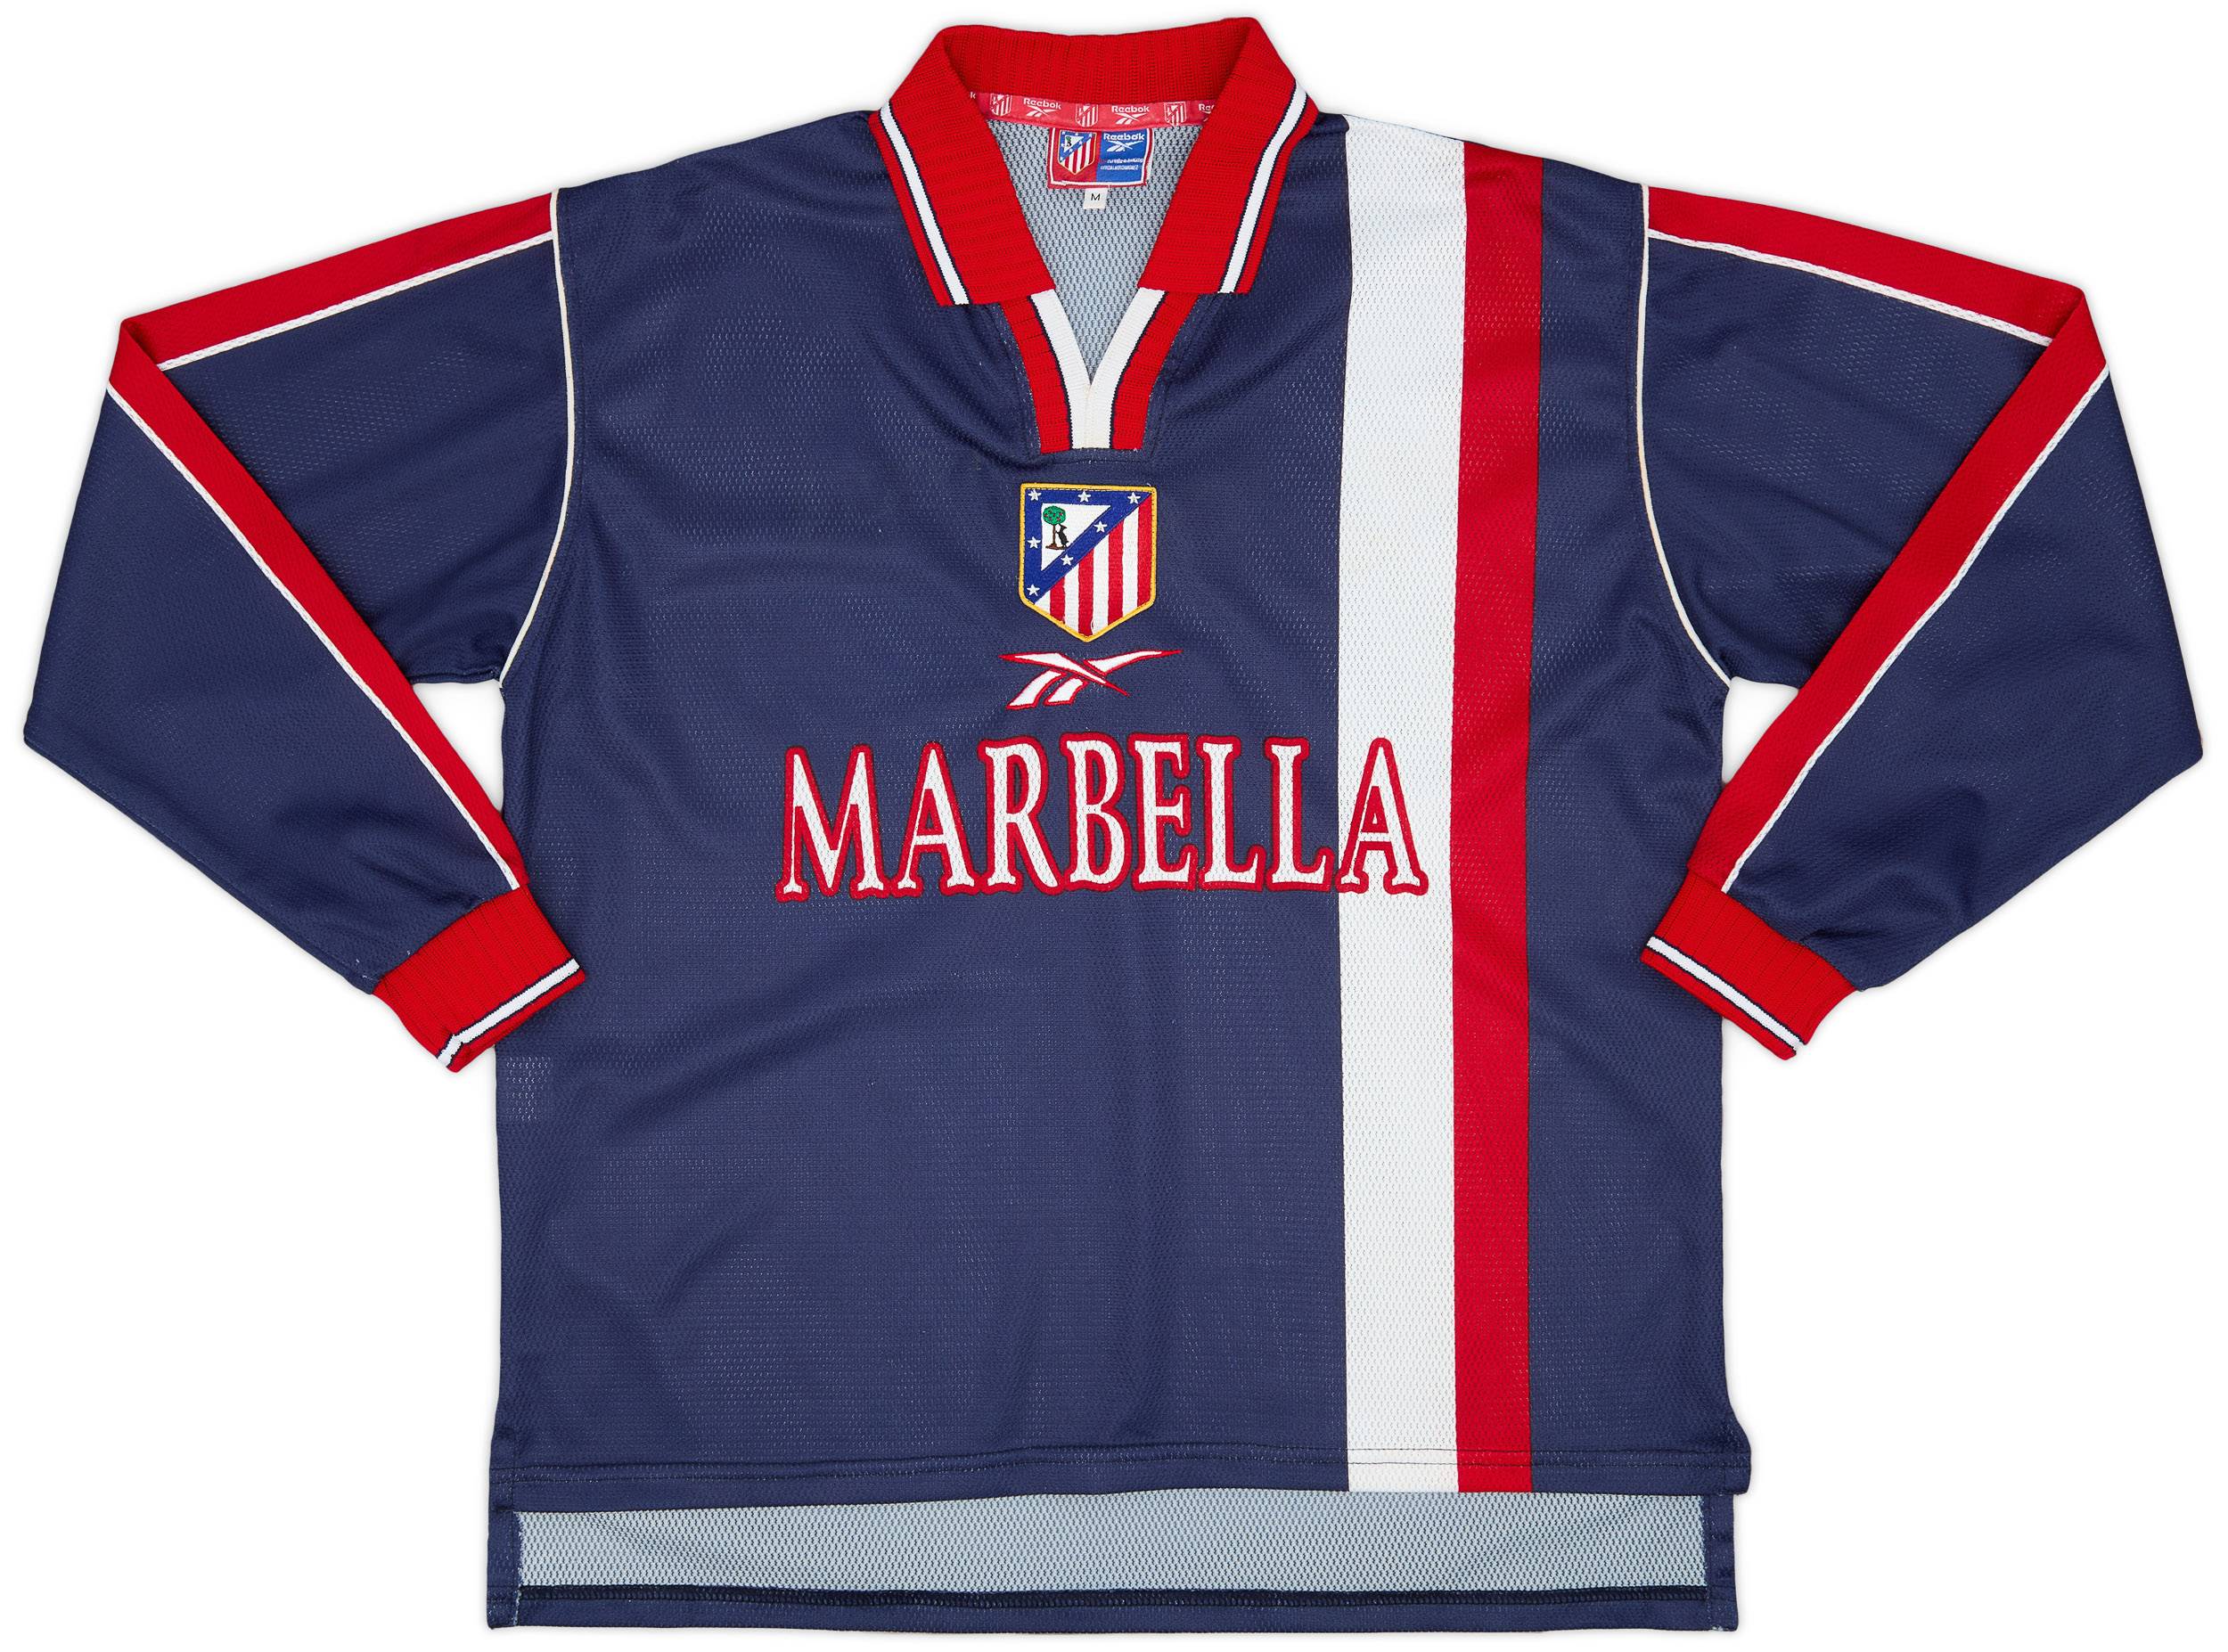 1998-99 Atletico Madrid Player Issue Away L/S Shirt - 8/10 - (M)